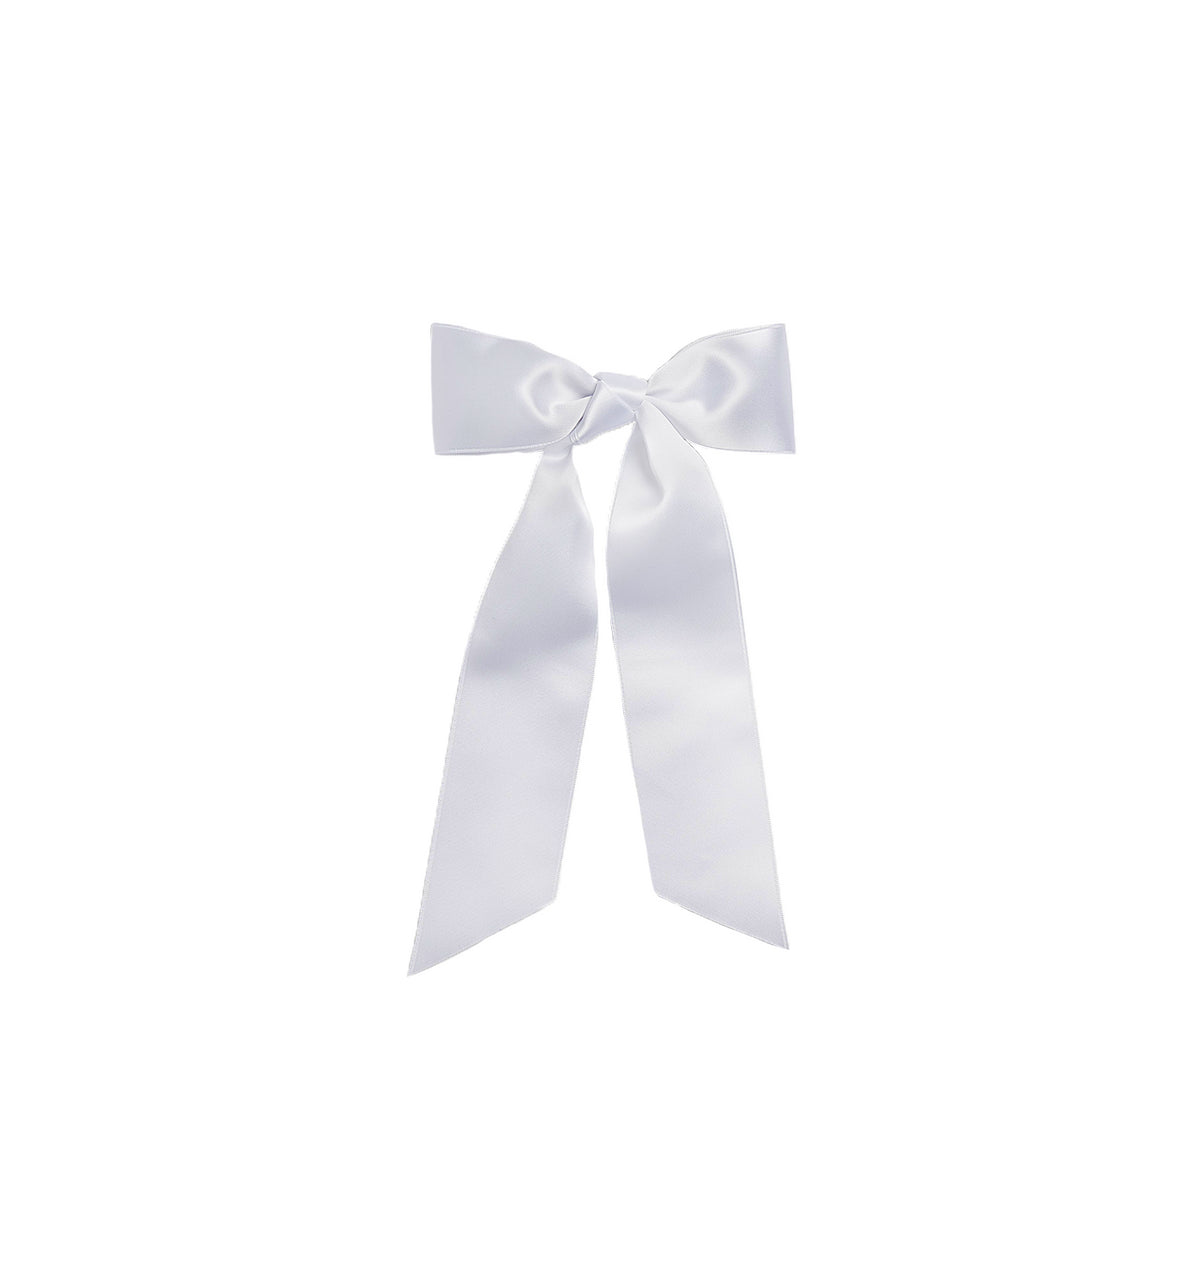 The Belle Bow in White